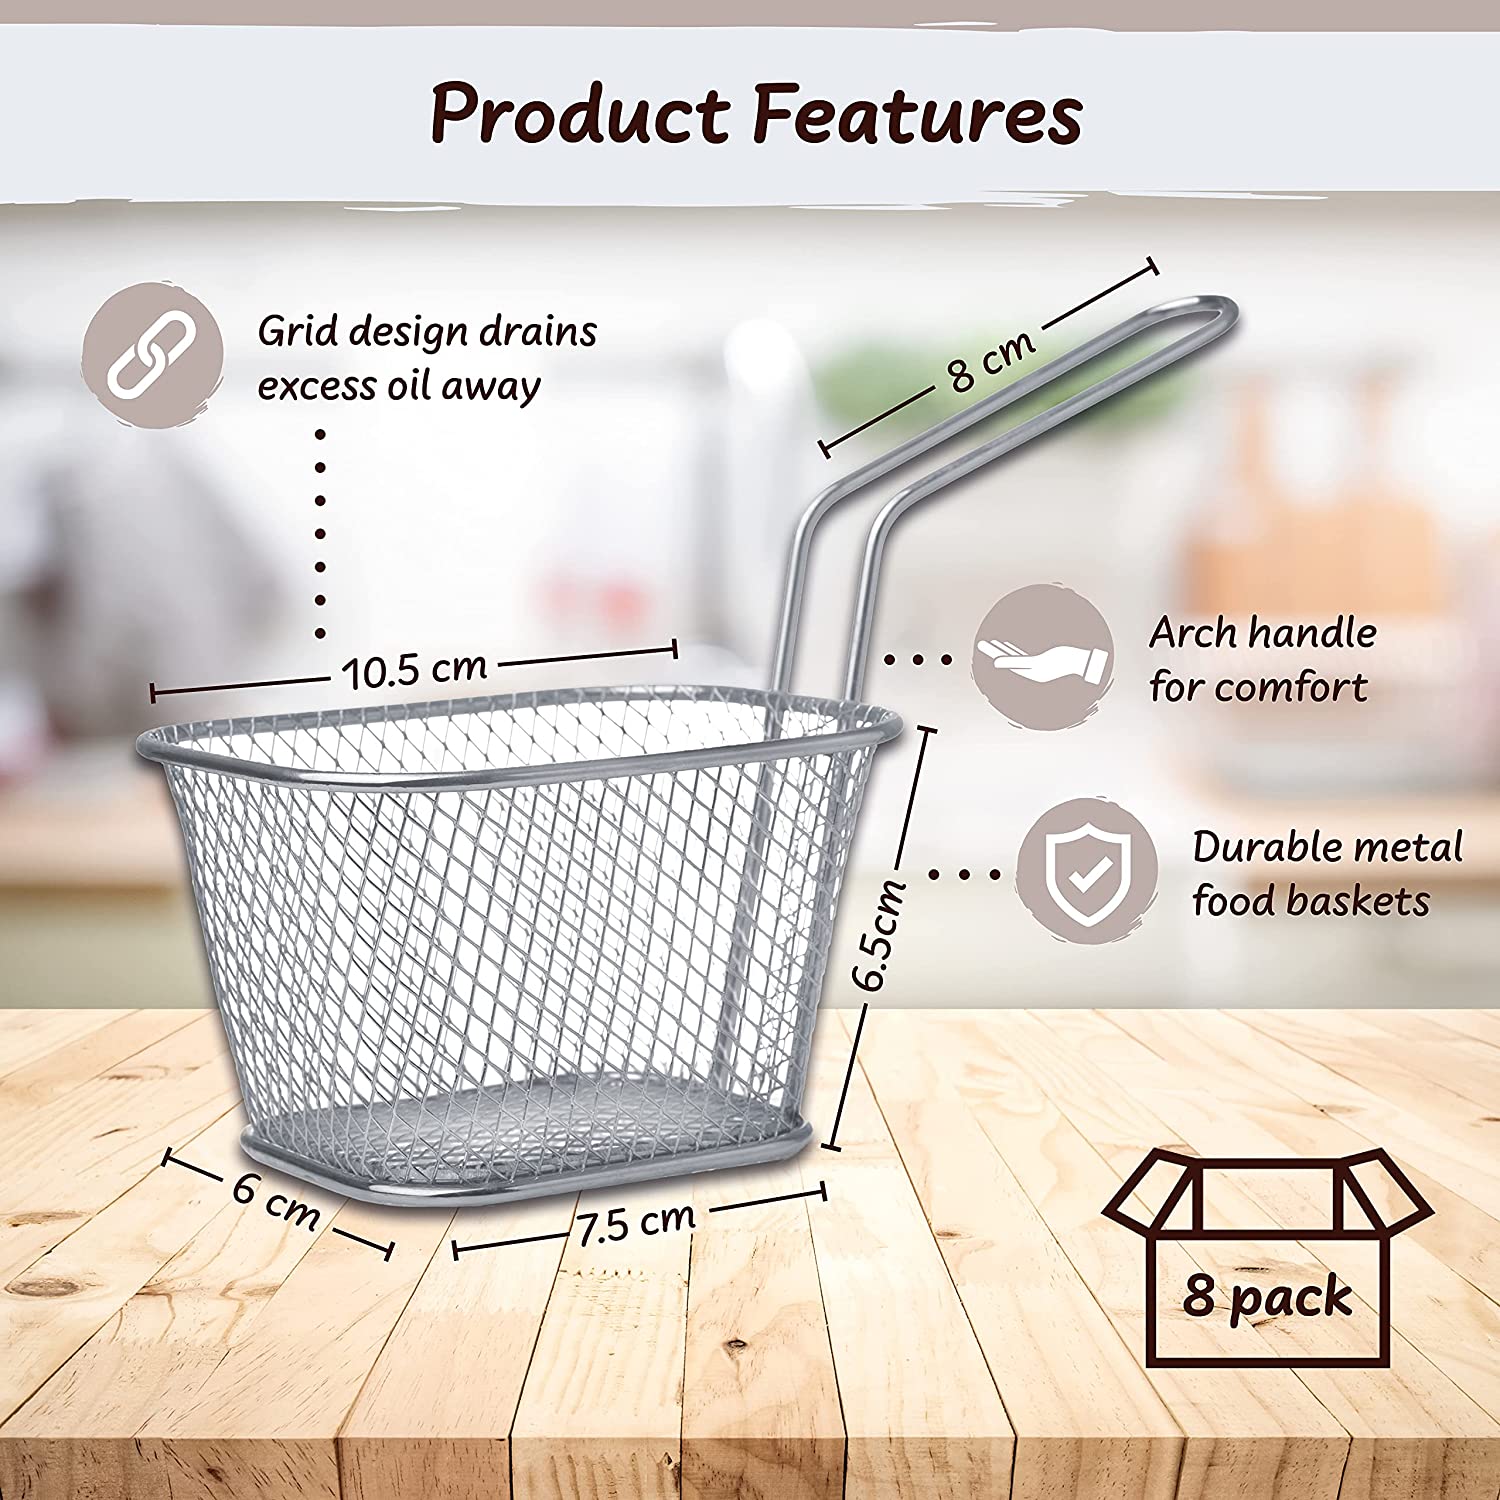 Chip Basket Product Feature